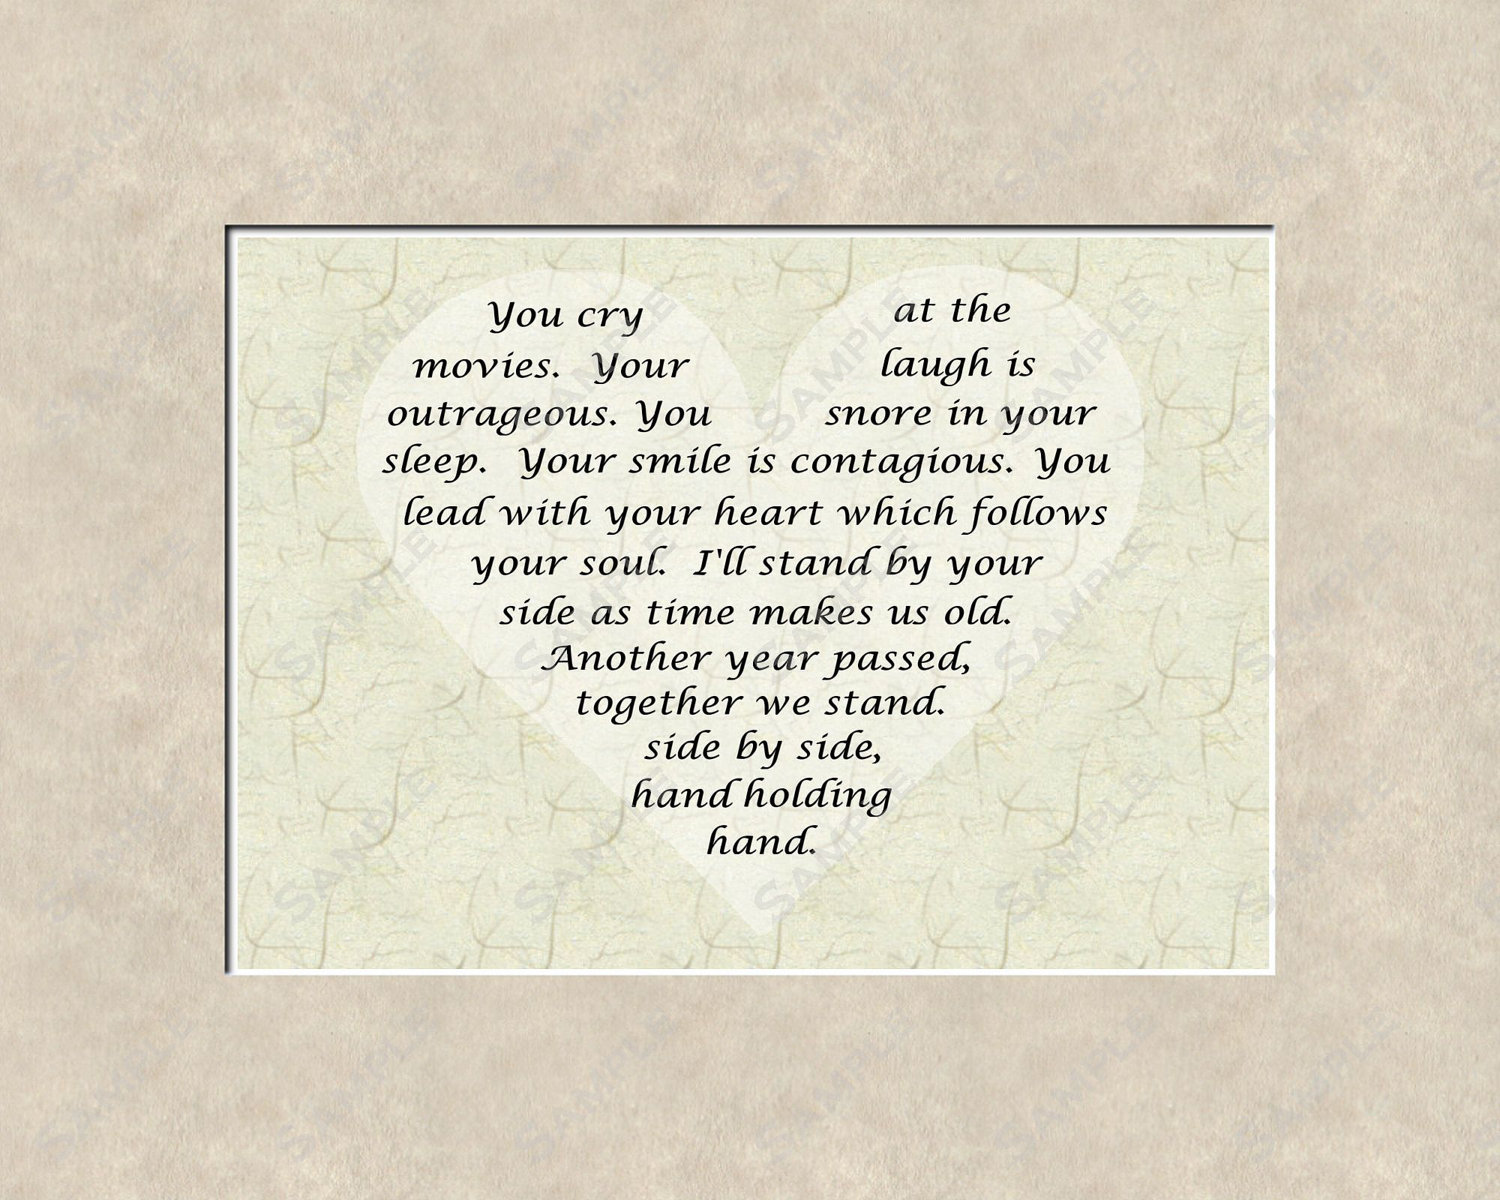 etsy.comFun Anniversary Gift Poem with